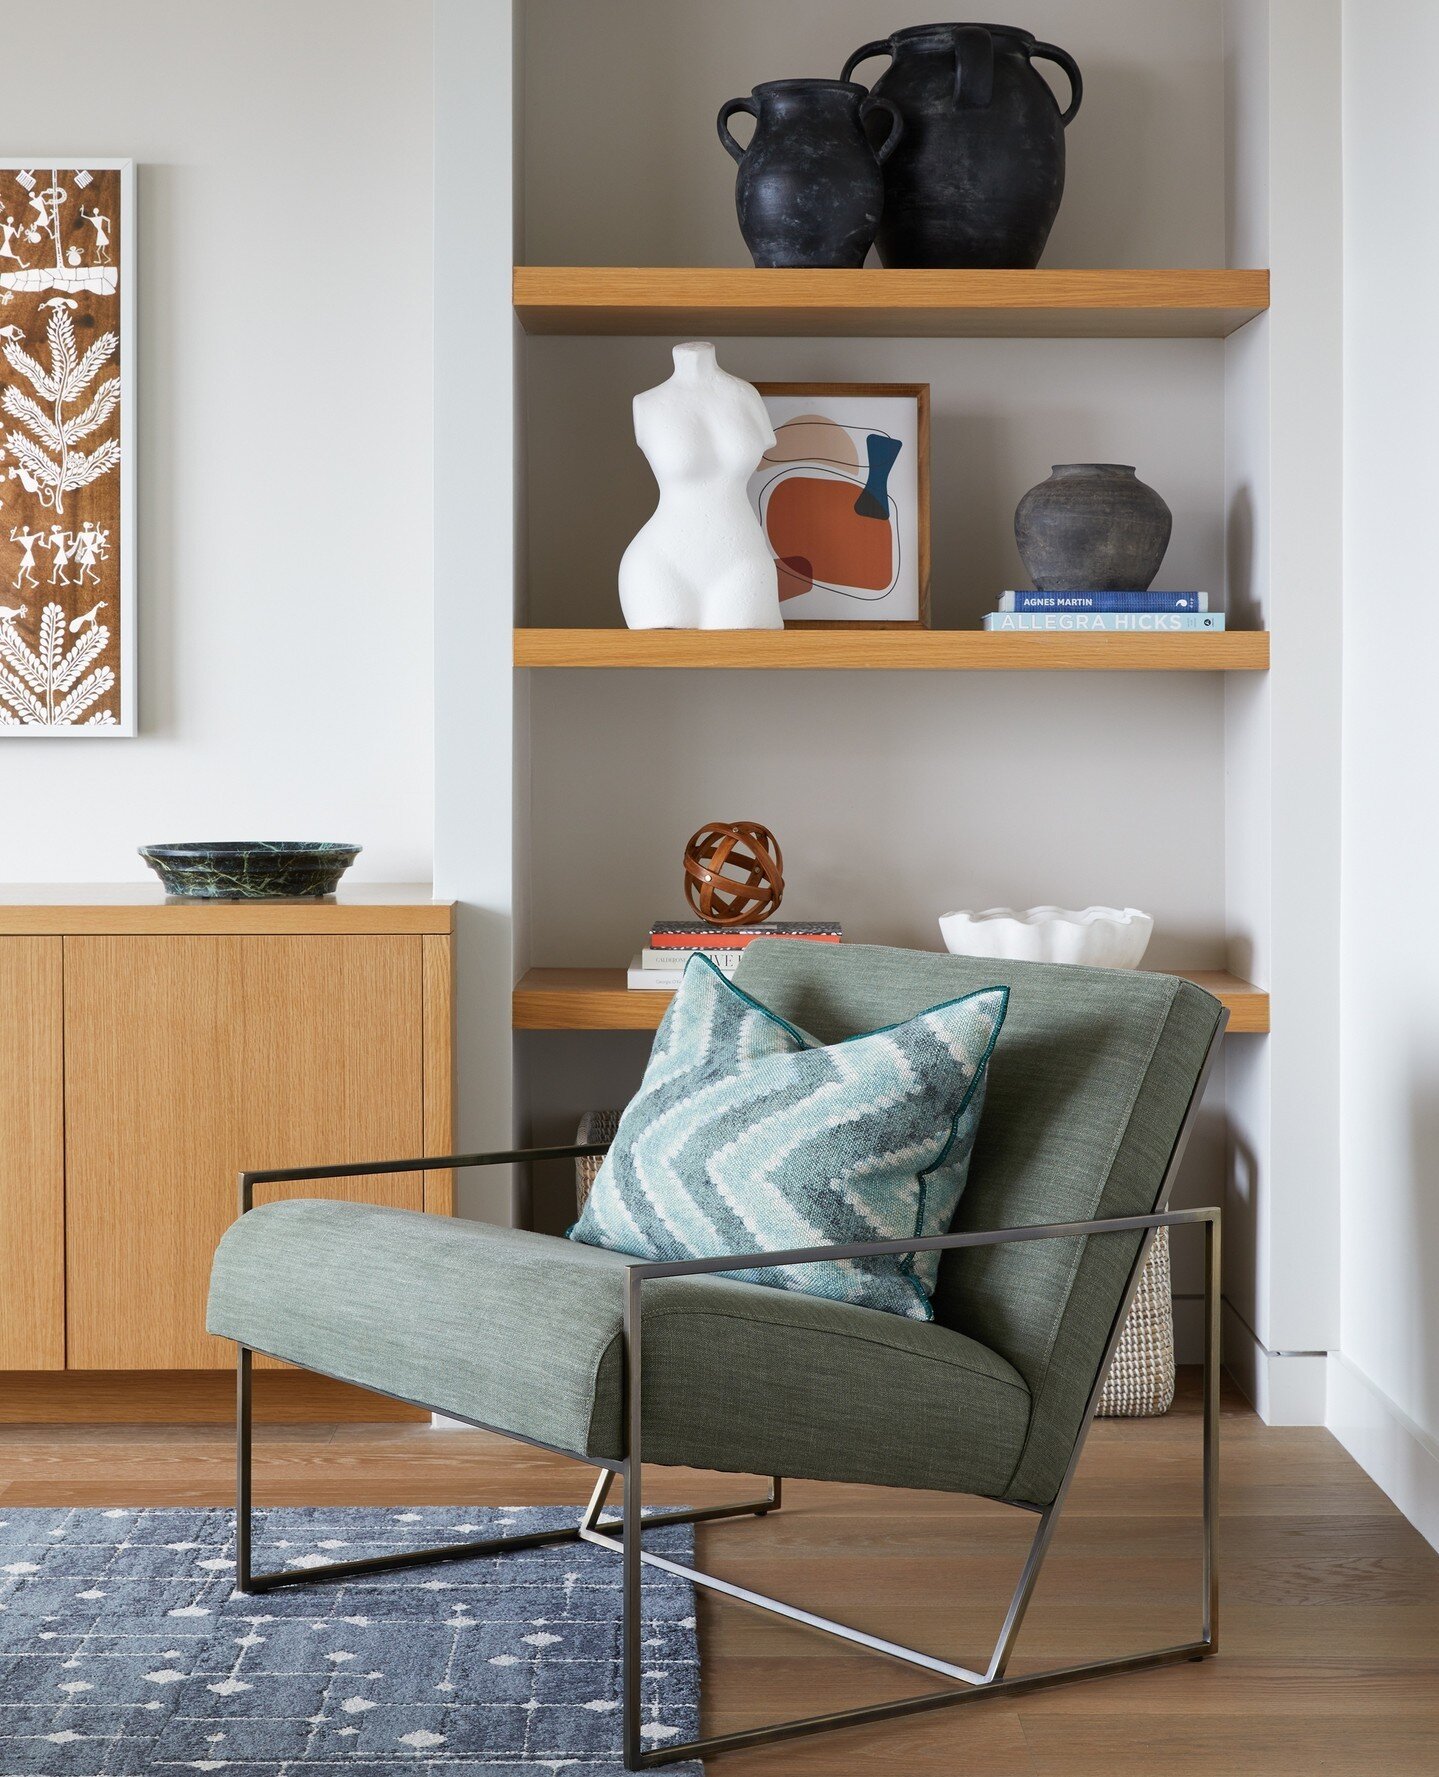 A warm neutral palette of white oak, blues and green in the living room at #ProjectGlenParkCozyModern. ⁠
.⁠
.⁠
.⁠
⁠
Photo: @margaretaustin_photo⁠
Styling &amp; Florals: @forslund_design ⁠